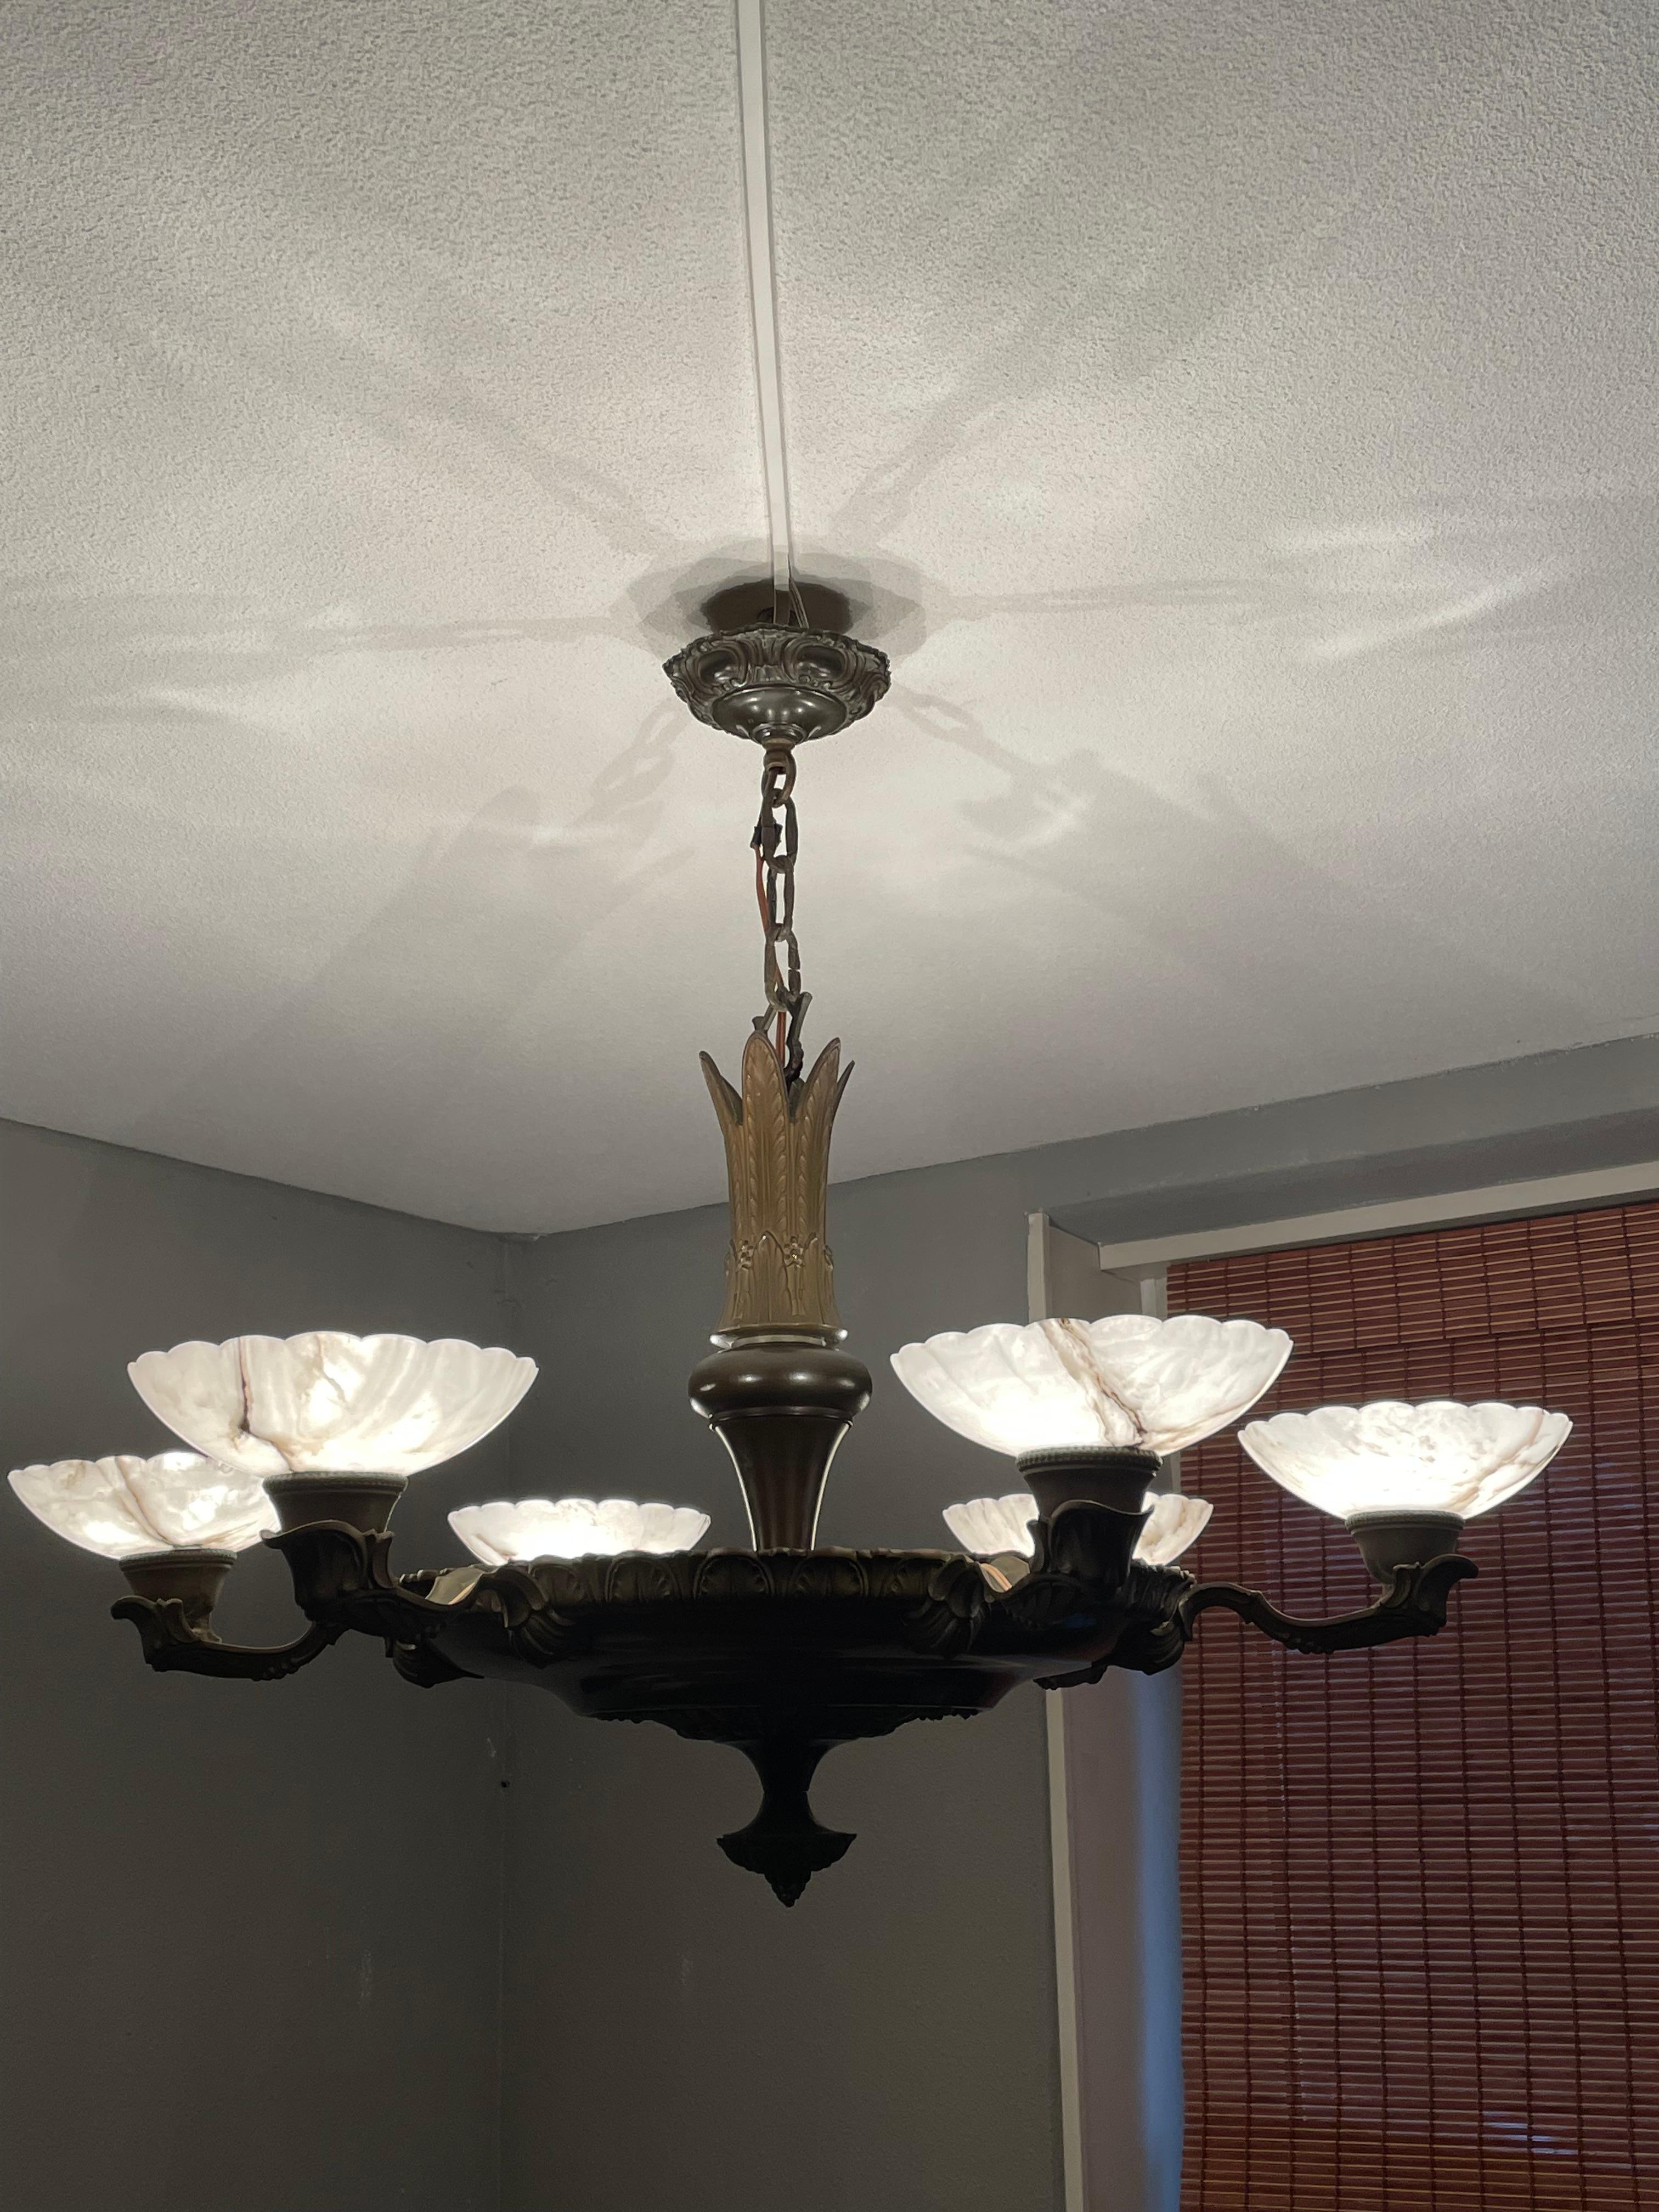 Striking and exclusive 1910s brass and alabaster light fixture for the perfect atmosphere.

If you are looking for a remarkable light fixture to grace your living space then this antique Art Deco era chandelier could very well be the one. The